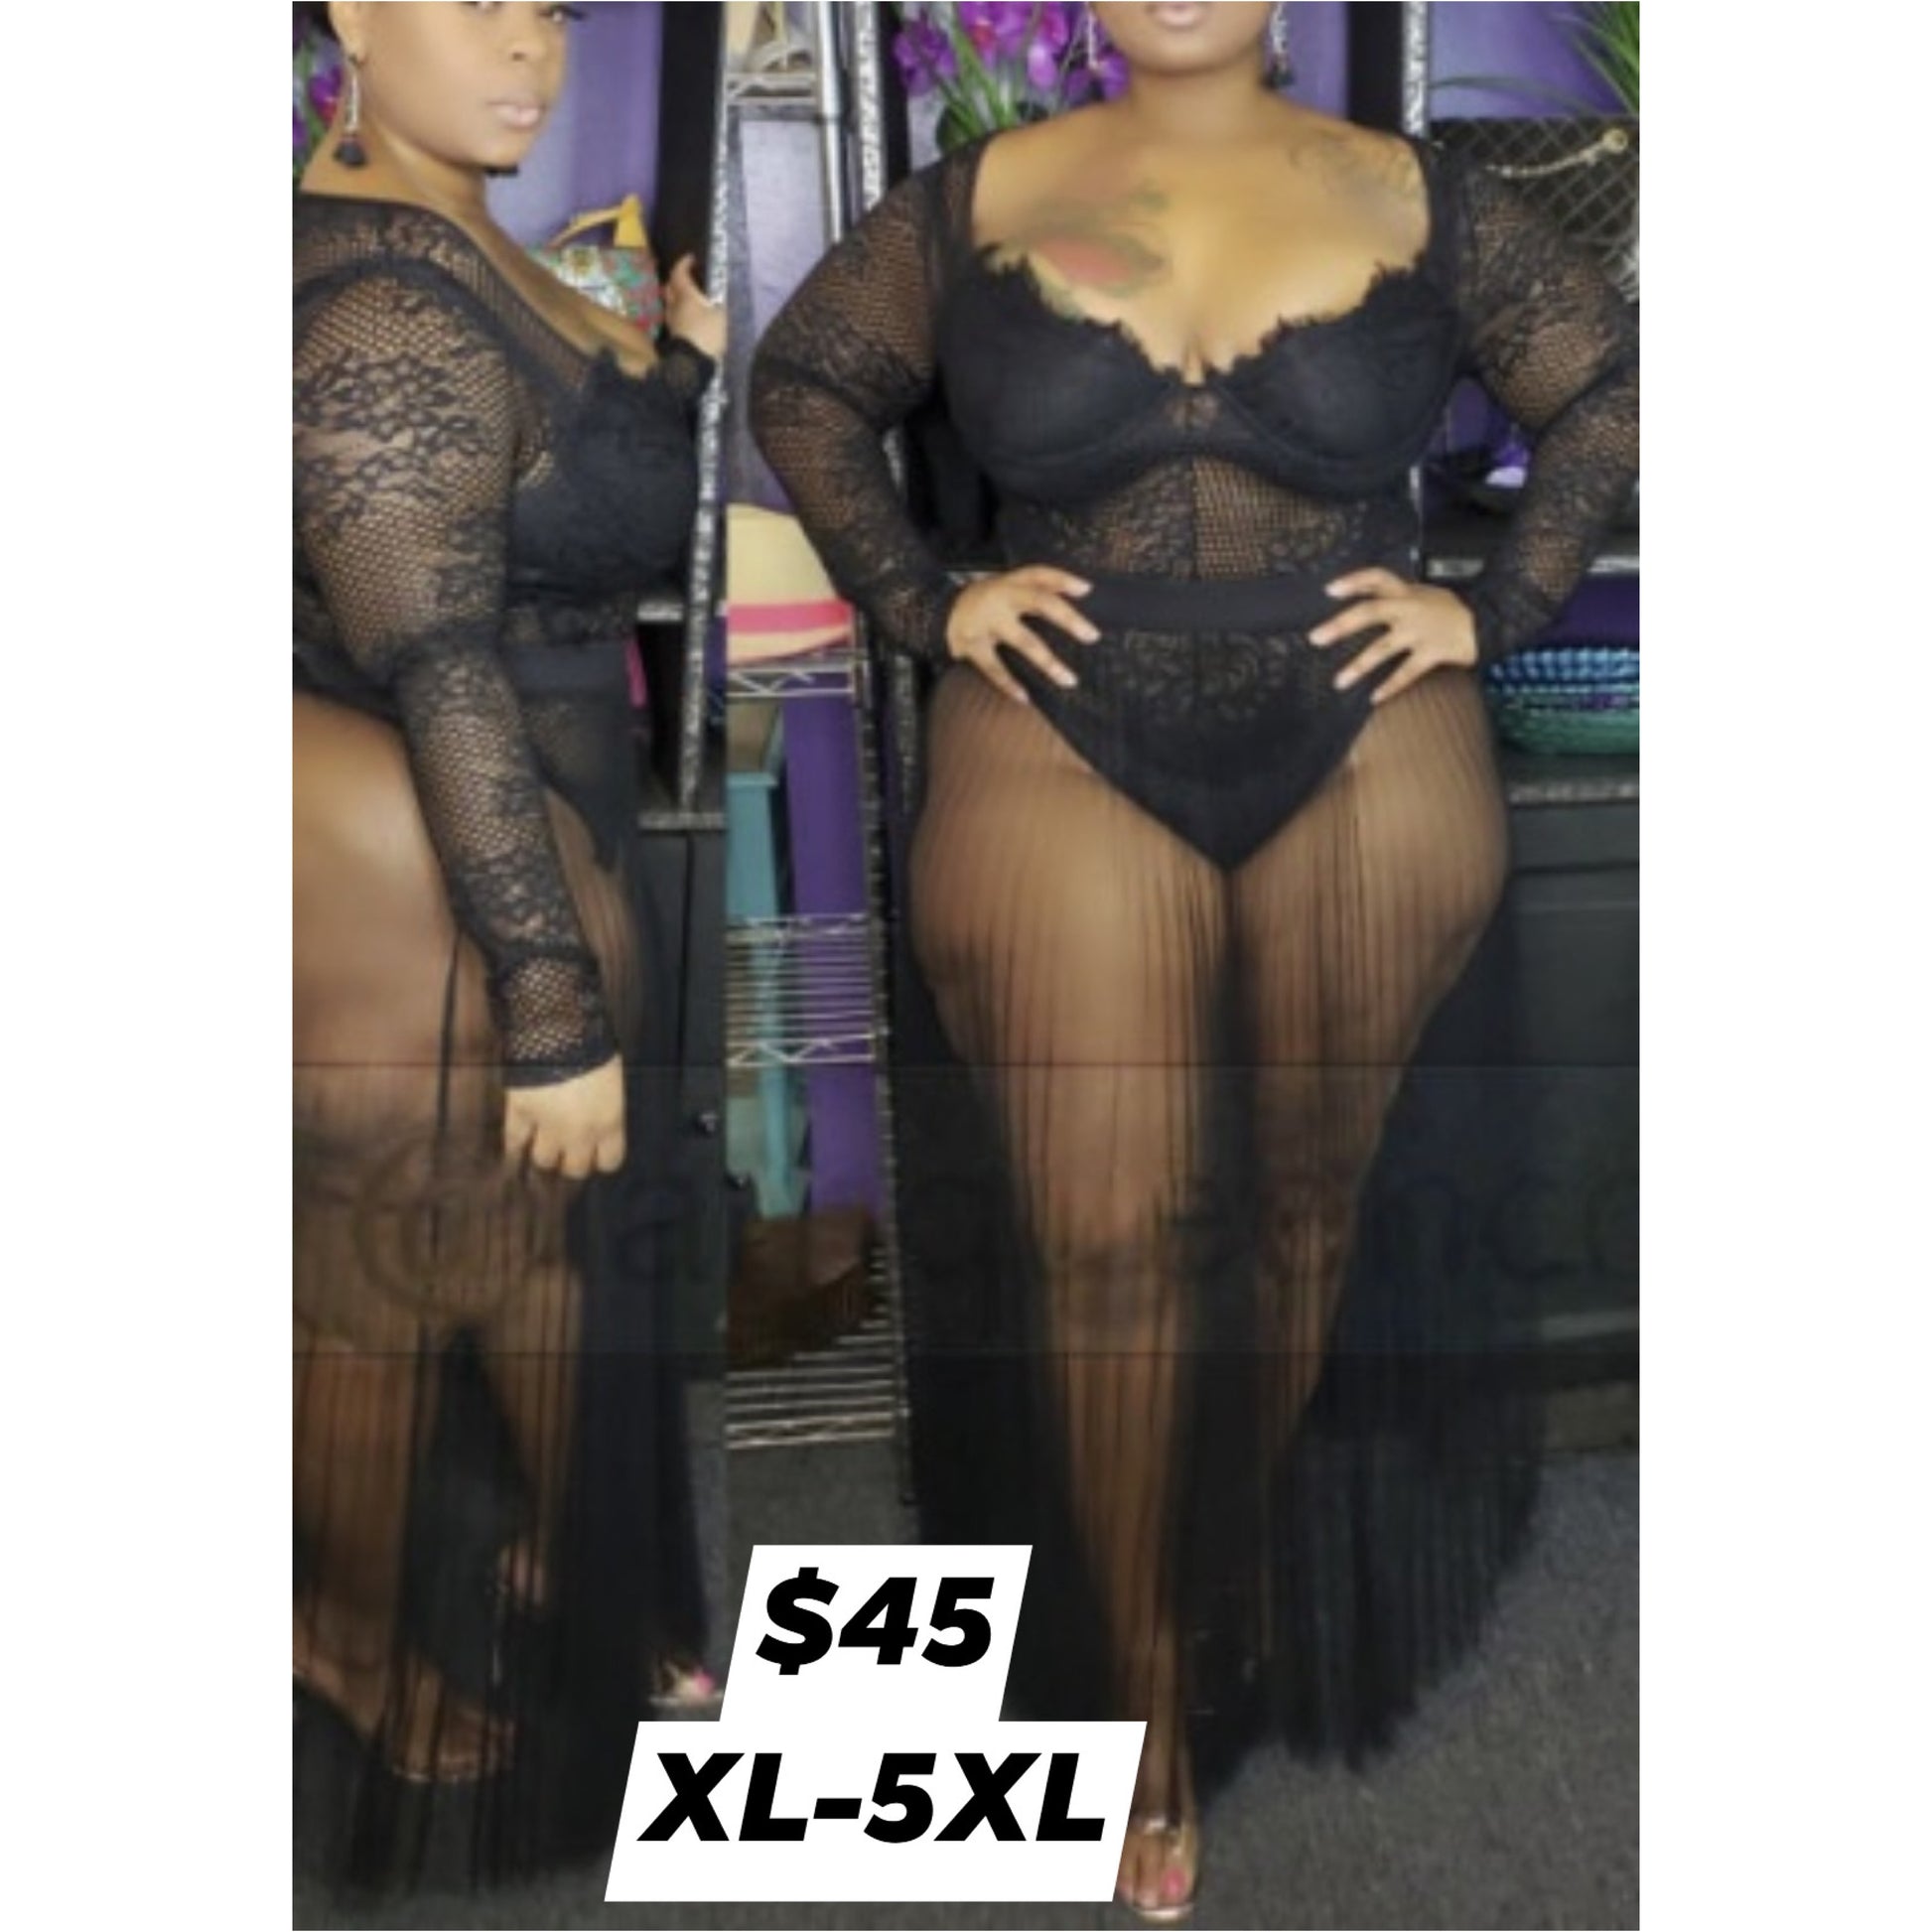 plus size matching set includes a see-through skirt and black bodysuit